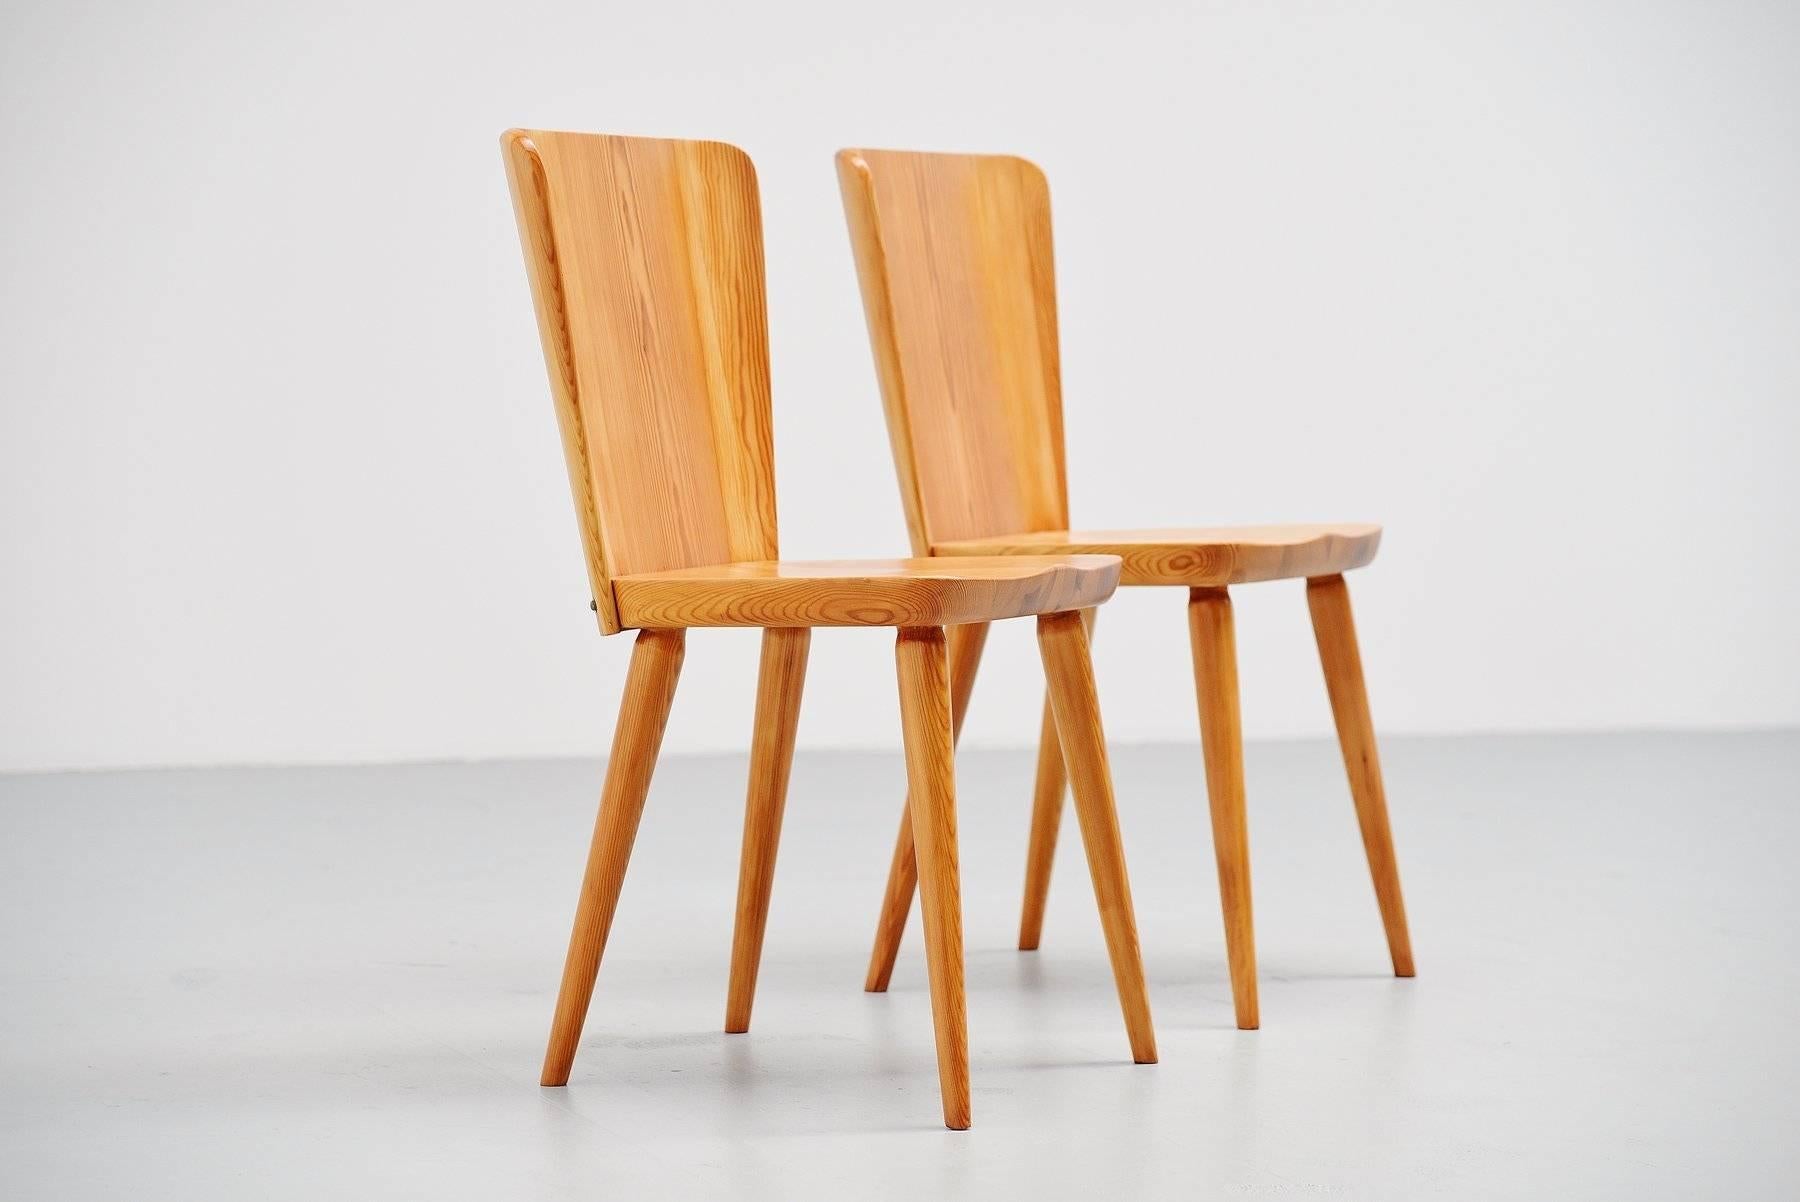 Very nice superbly crafted side chairs designed by Carl Malmsten for Svensk Fur - Karl Andersson and Soner, Sweden, 1940. These chairs are made of solid pinewood and are crafted into perfection. The connections on the seat and back are very